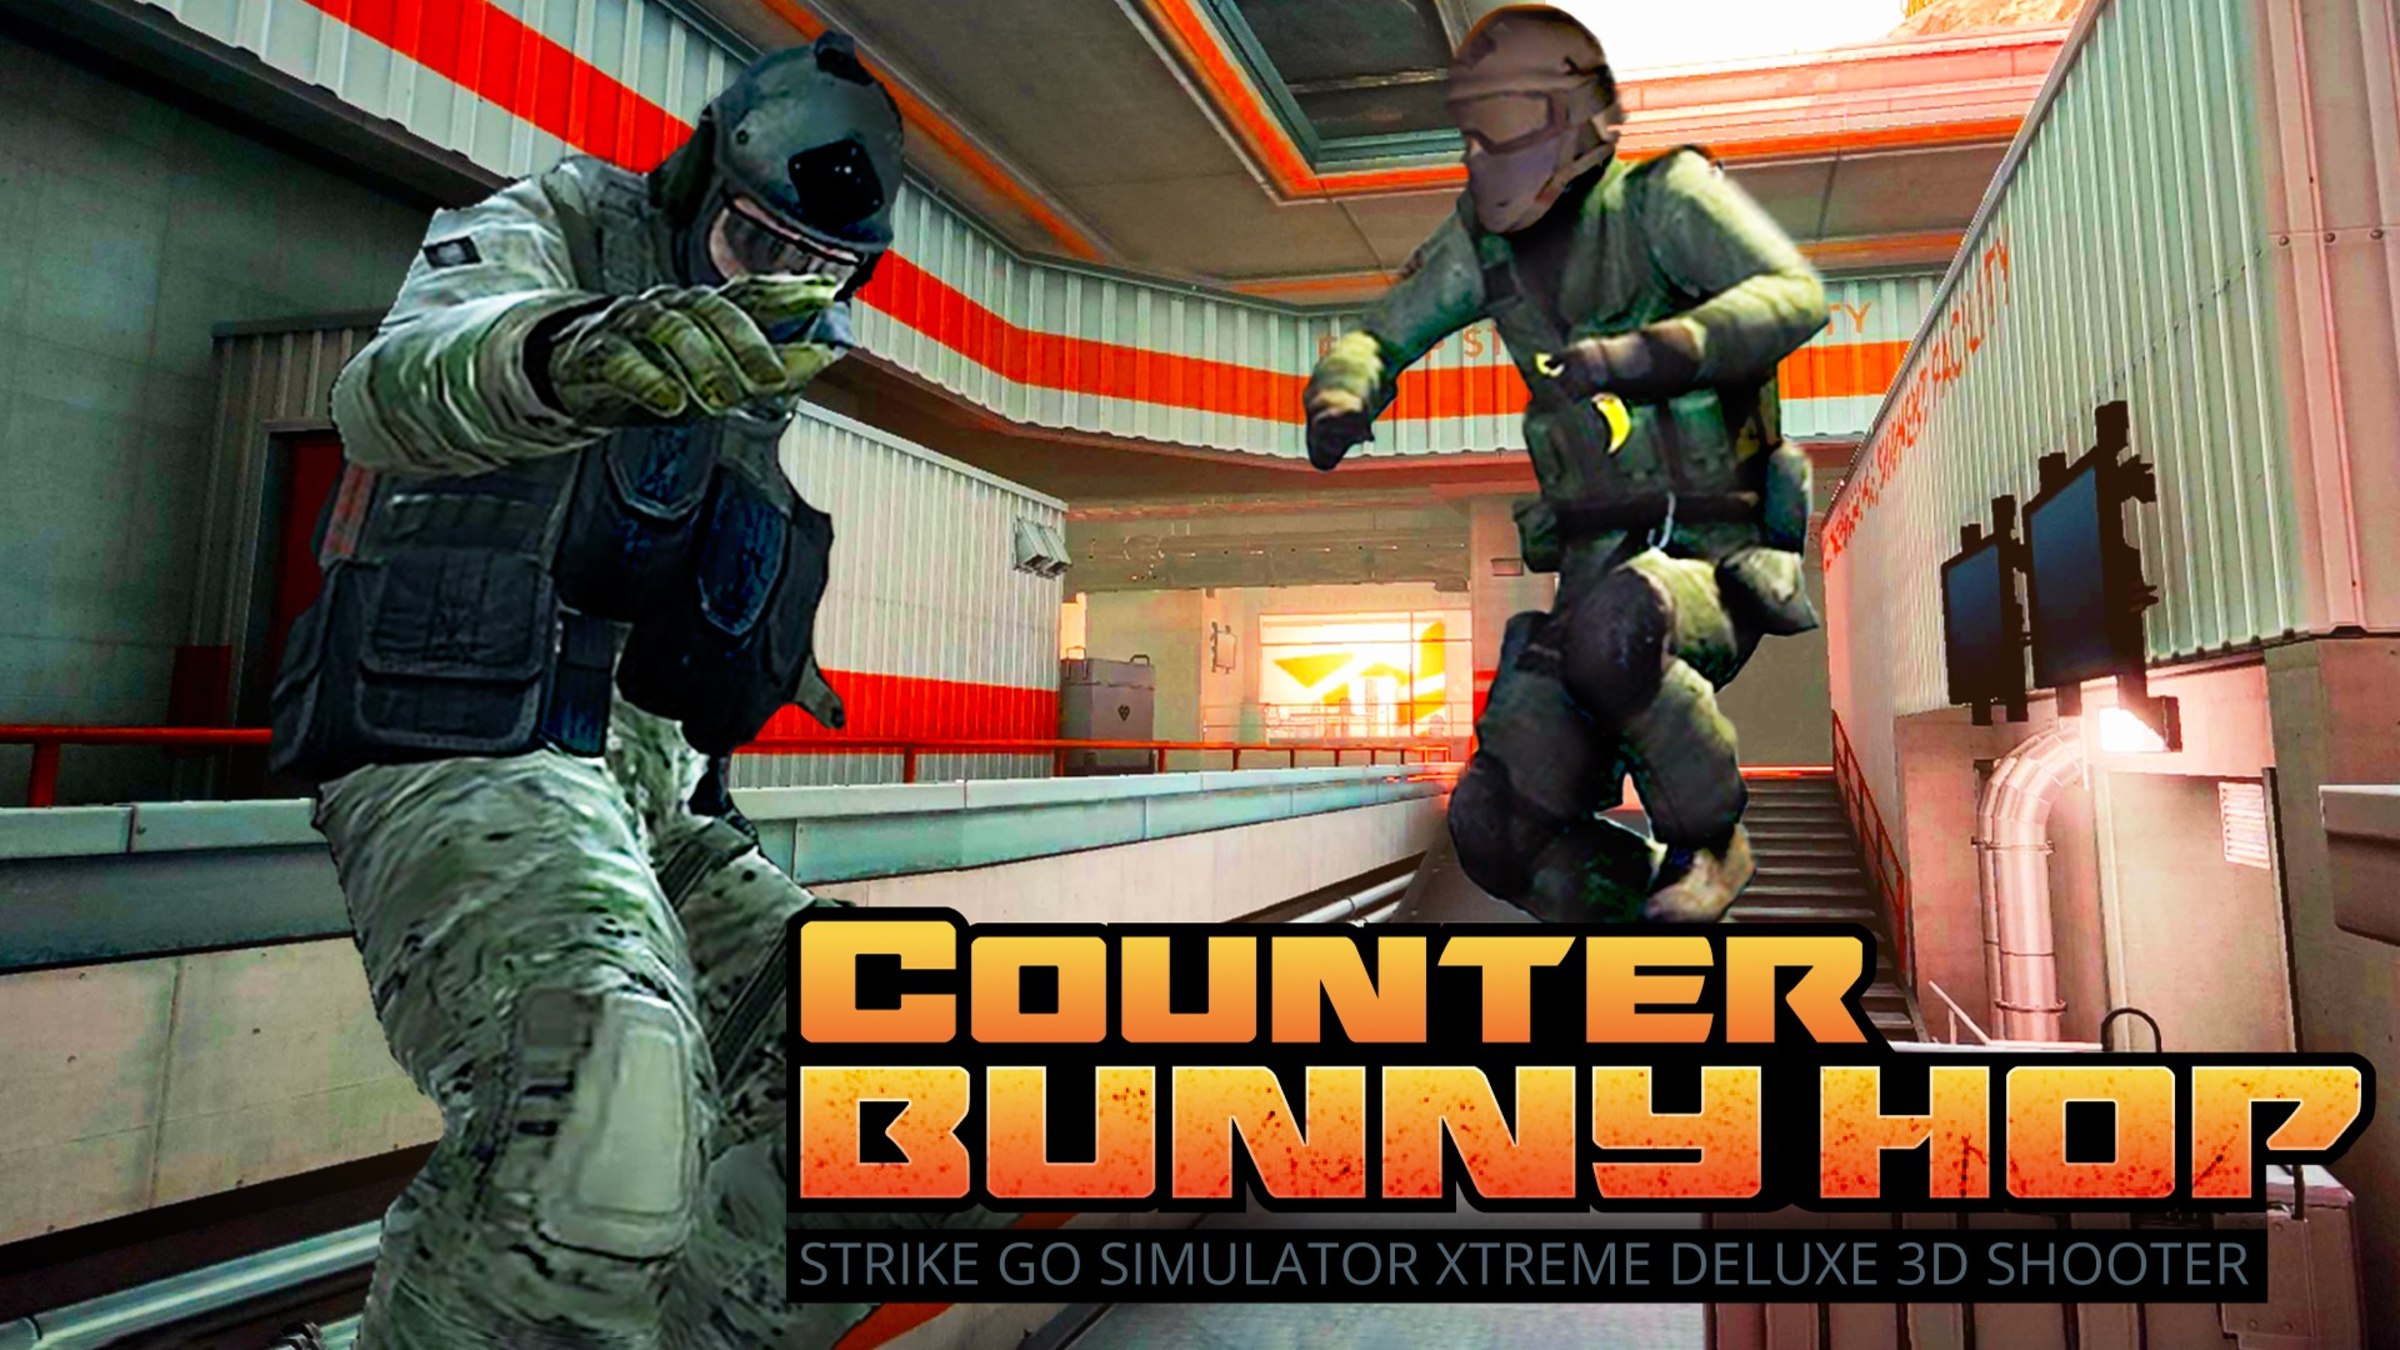 Counter Bunny Hop - Strike Go Simulator Xtreme Deluxe 3D Shooter for Nintendo Switch